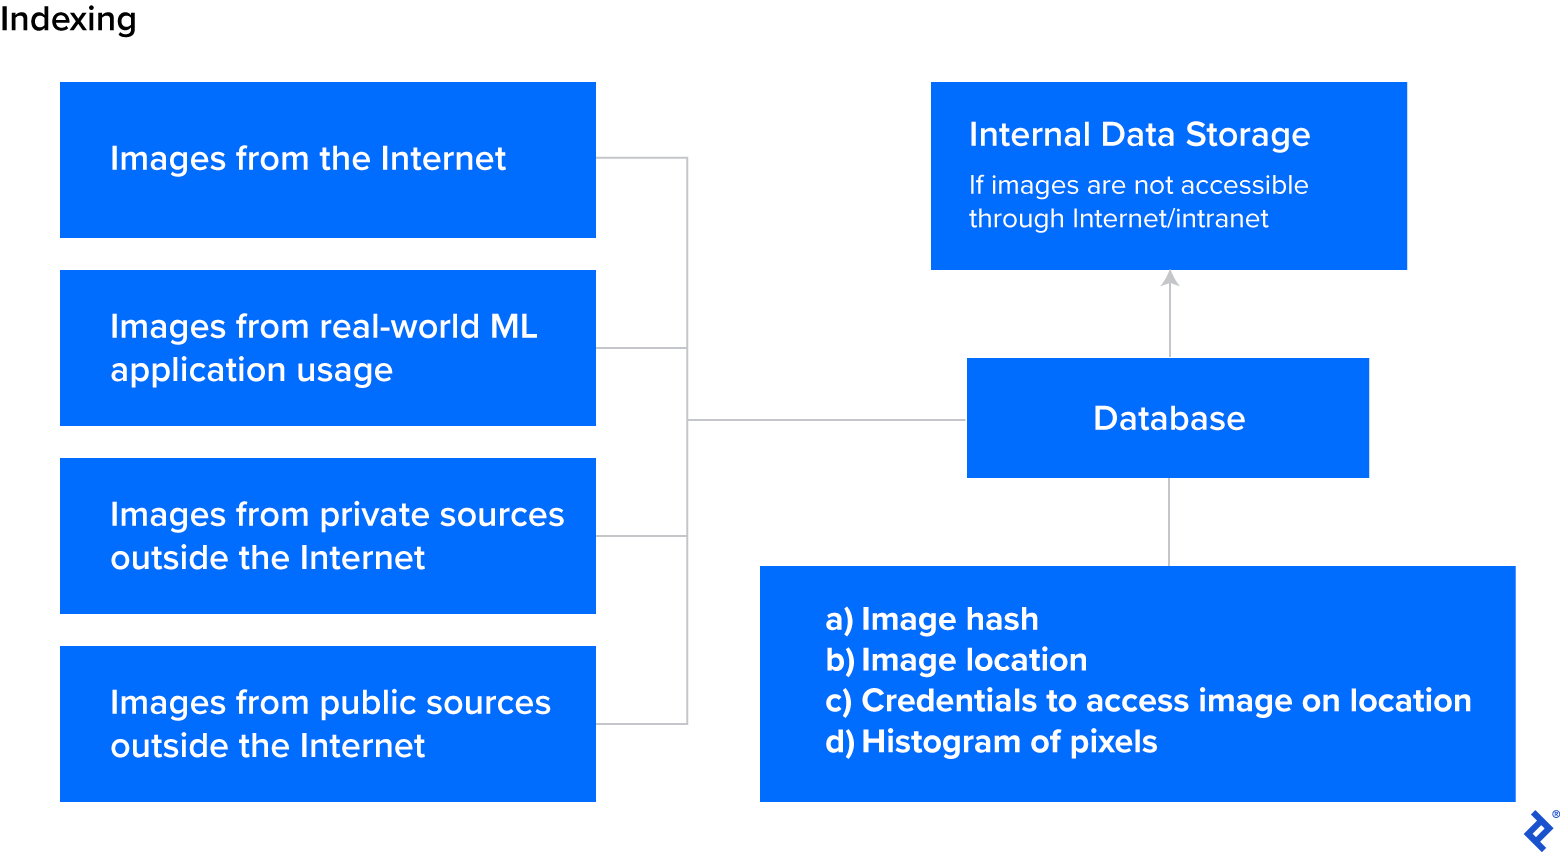 An indexing flowchart shows images from four sources entering the database and being indexed and stored in internal data storage if they’re not available online.